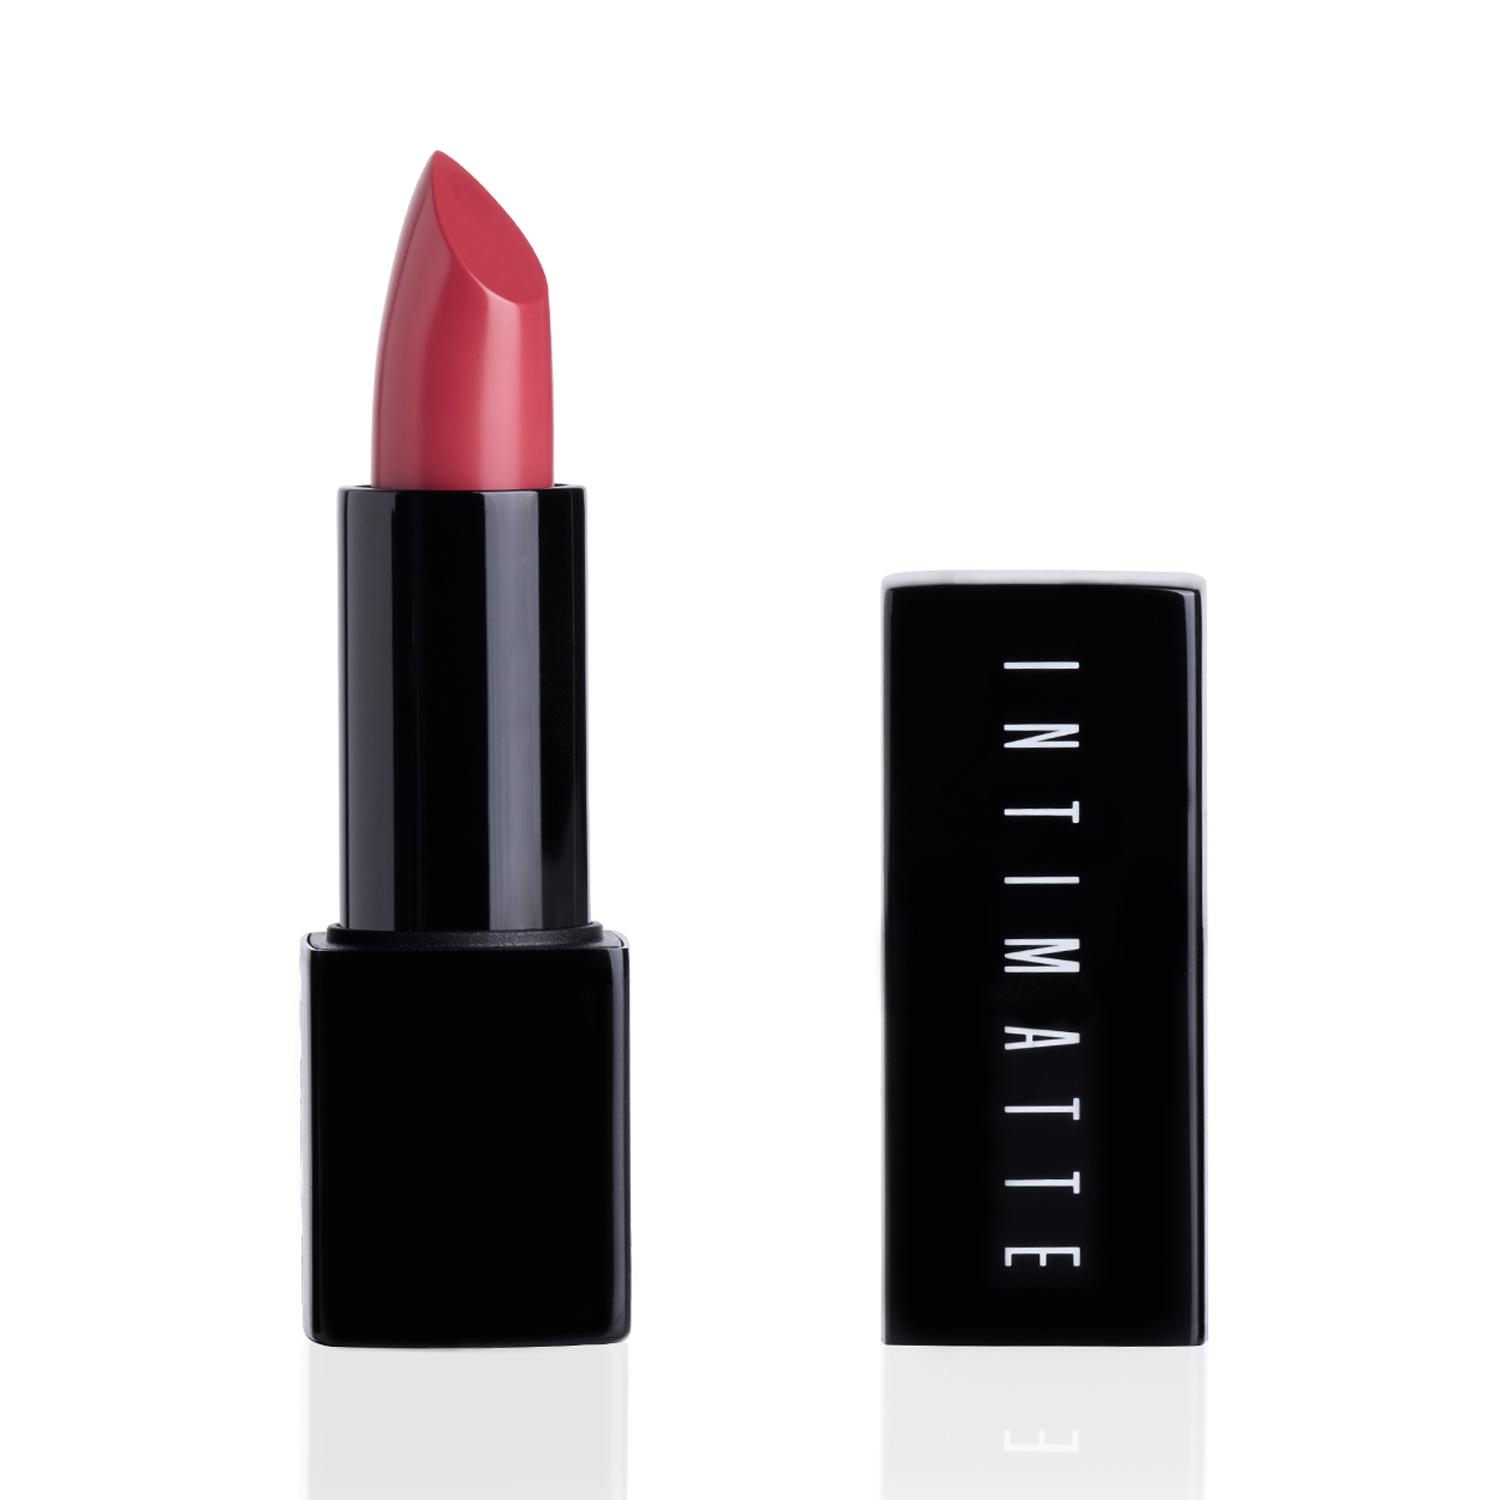 PAC | PAC Intimatte Lipstick - I'M Yours (4g)